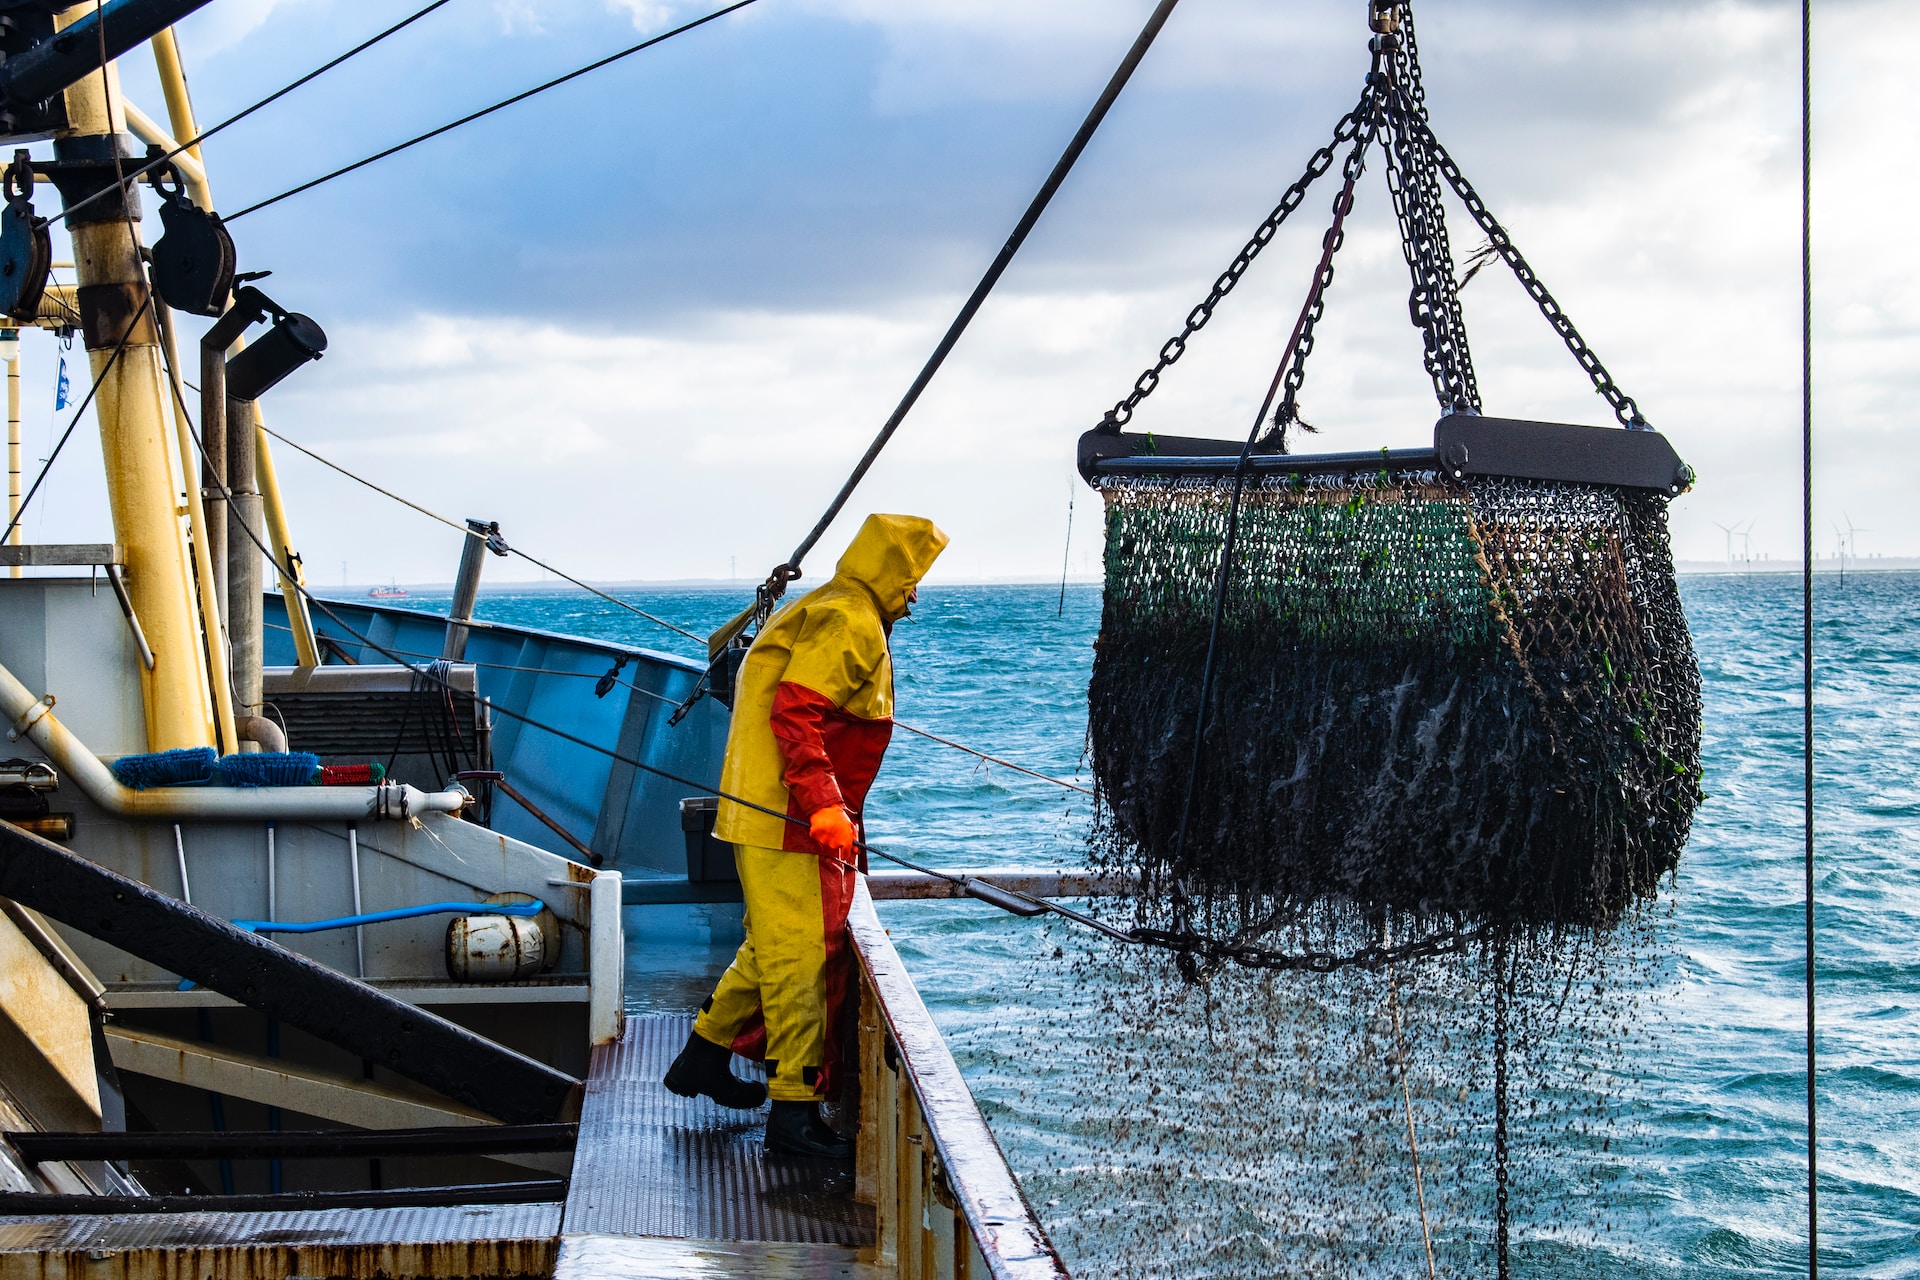 A commercial fisherman leads in a net full of fish on a commercial fishing vessel.